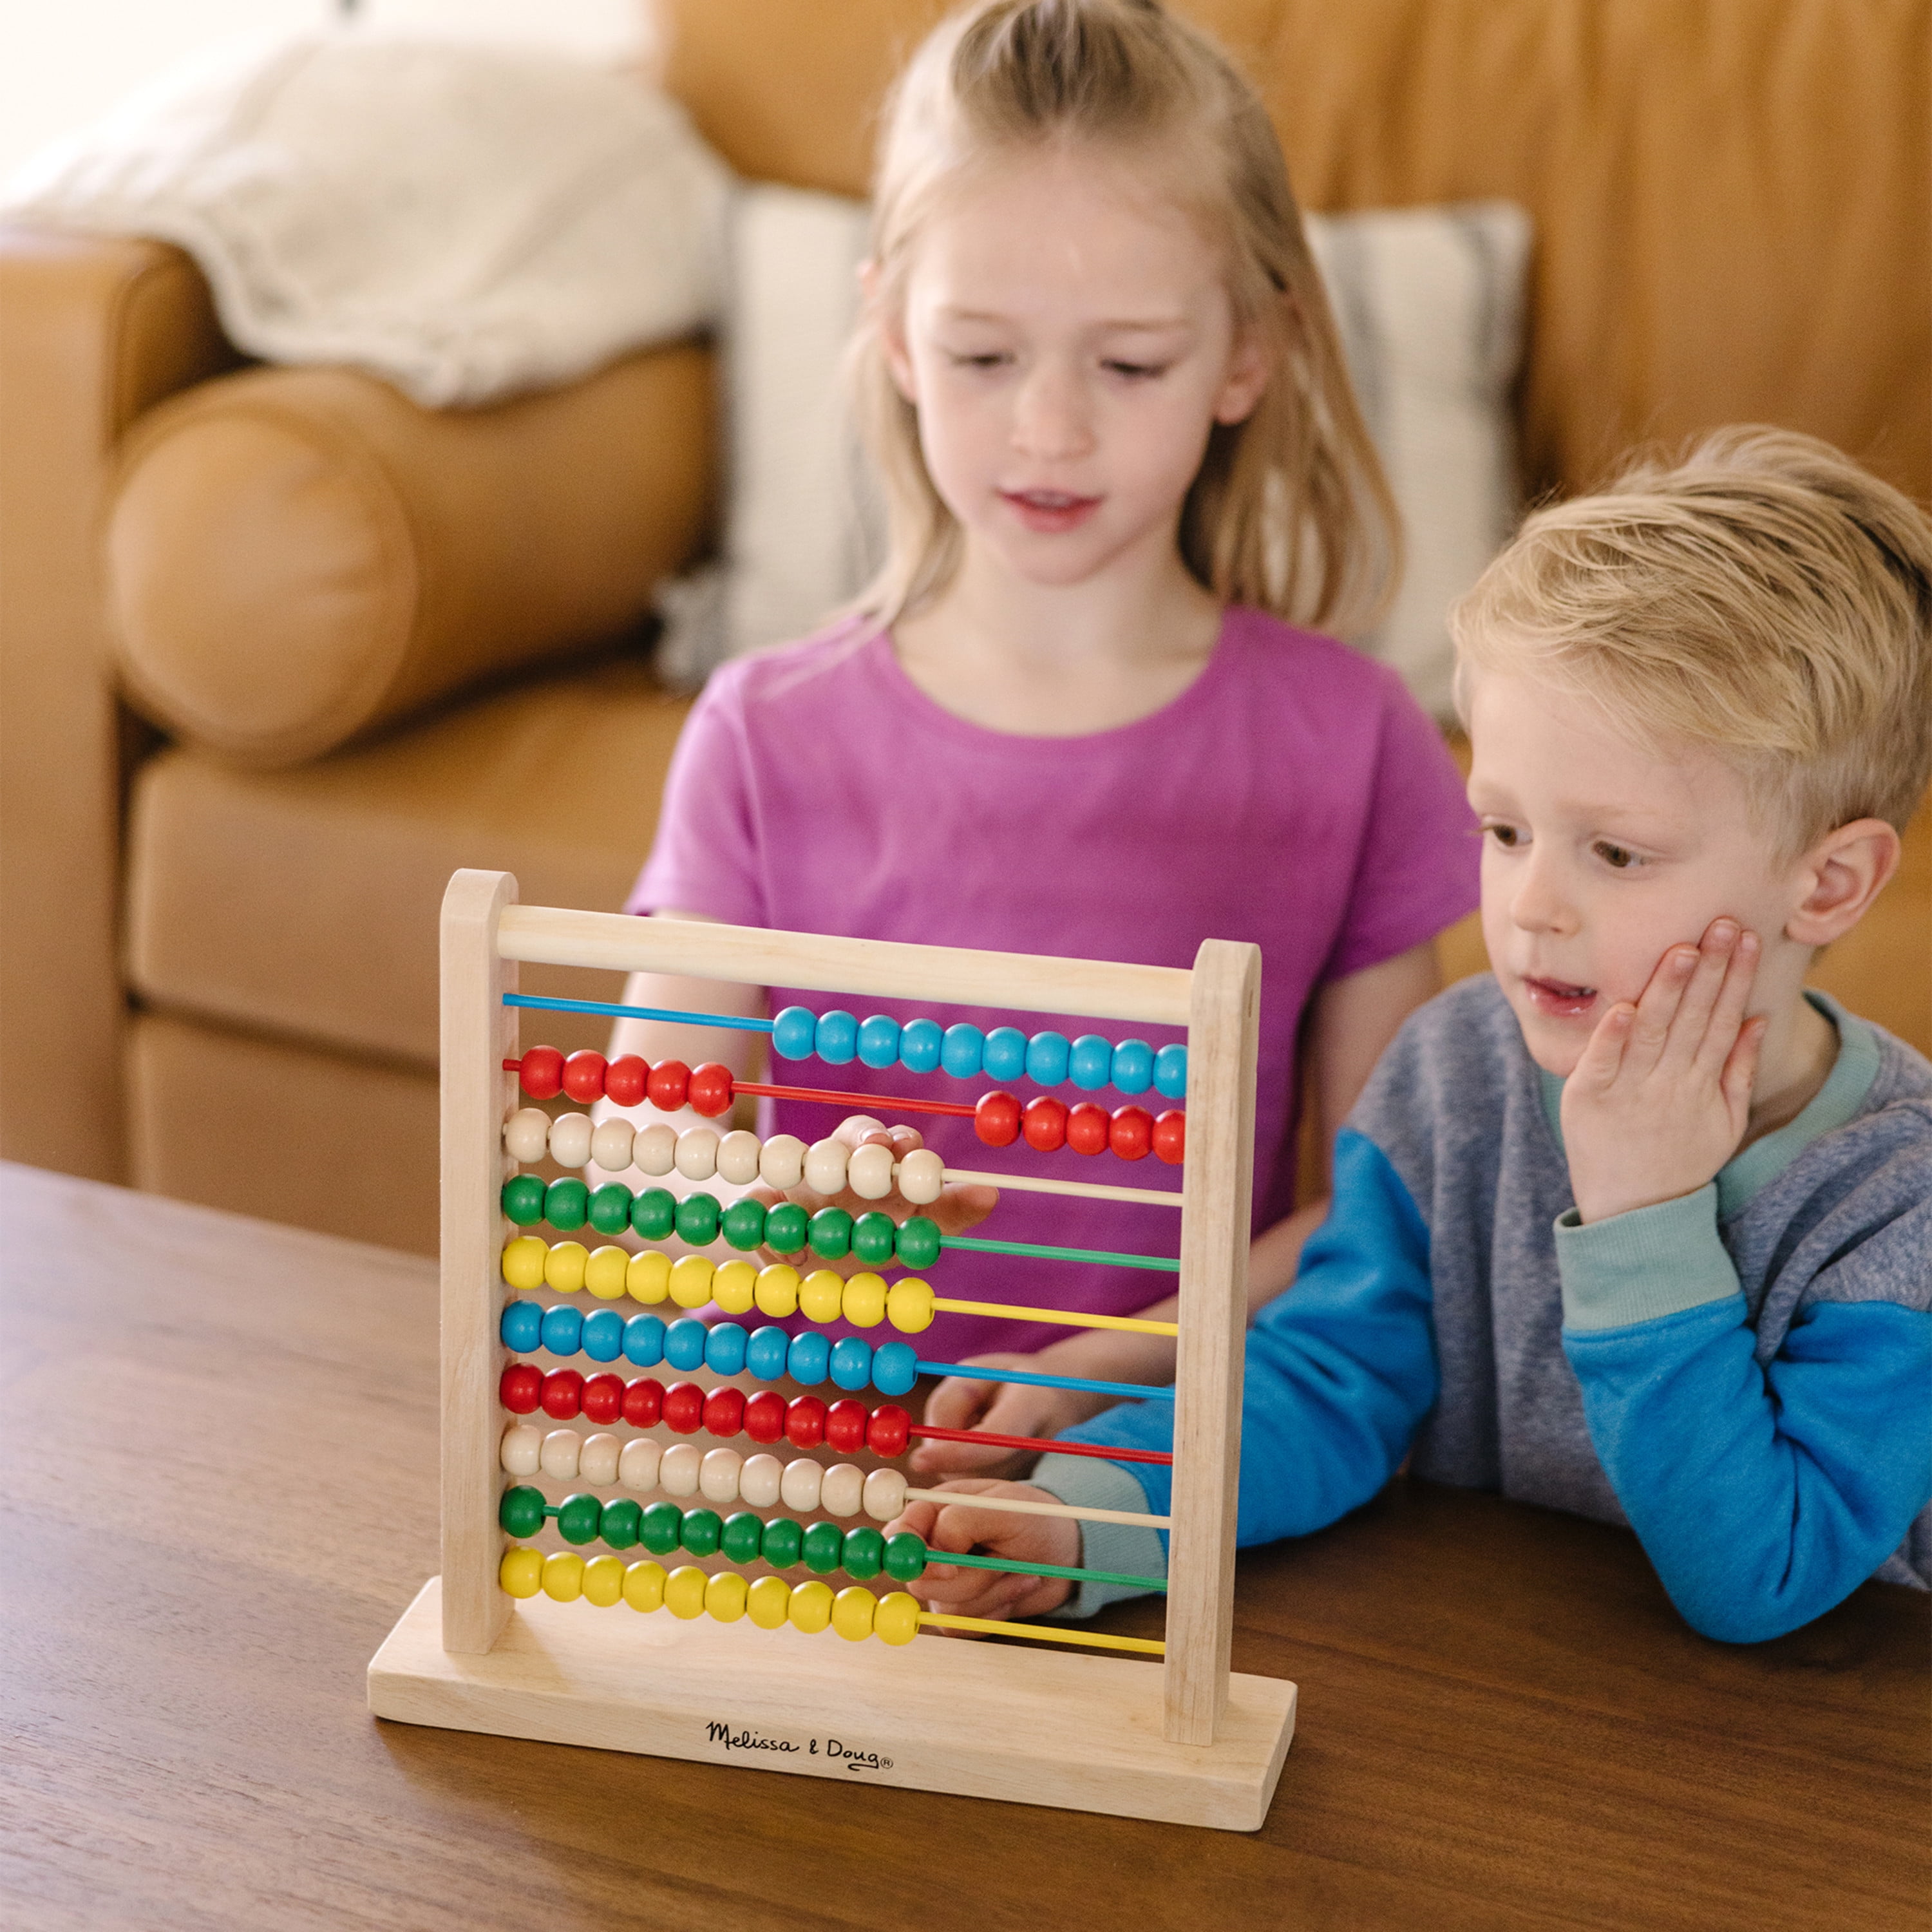 Details about   Wooden Bead Abacus Educational Math Learning Colourful Toy Counting Number #H5 